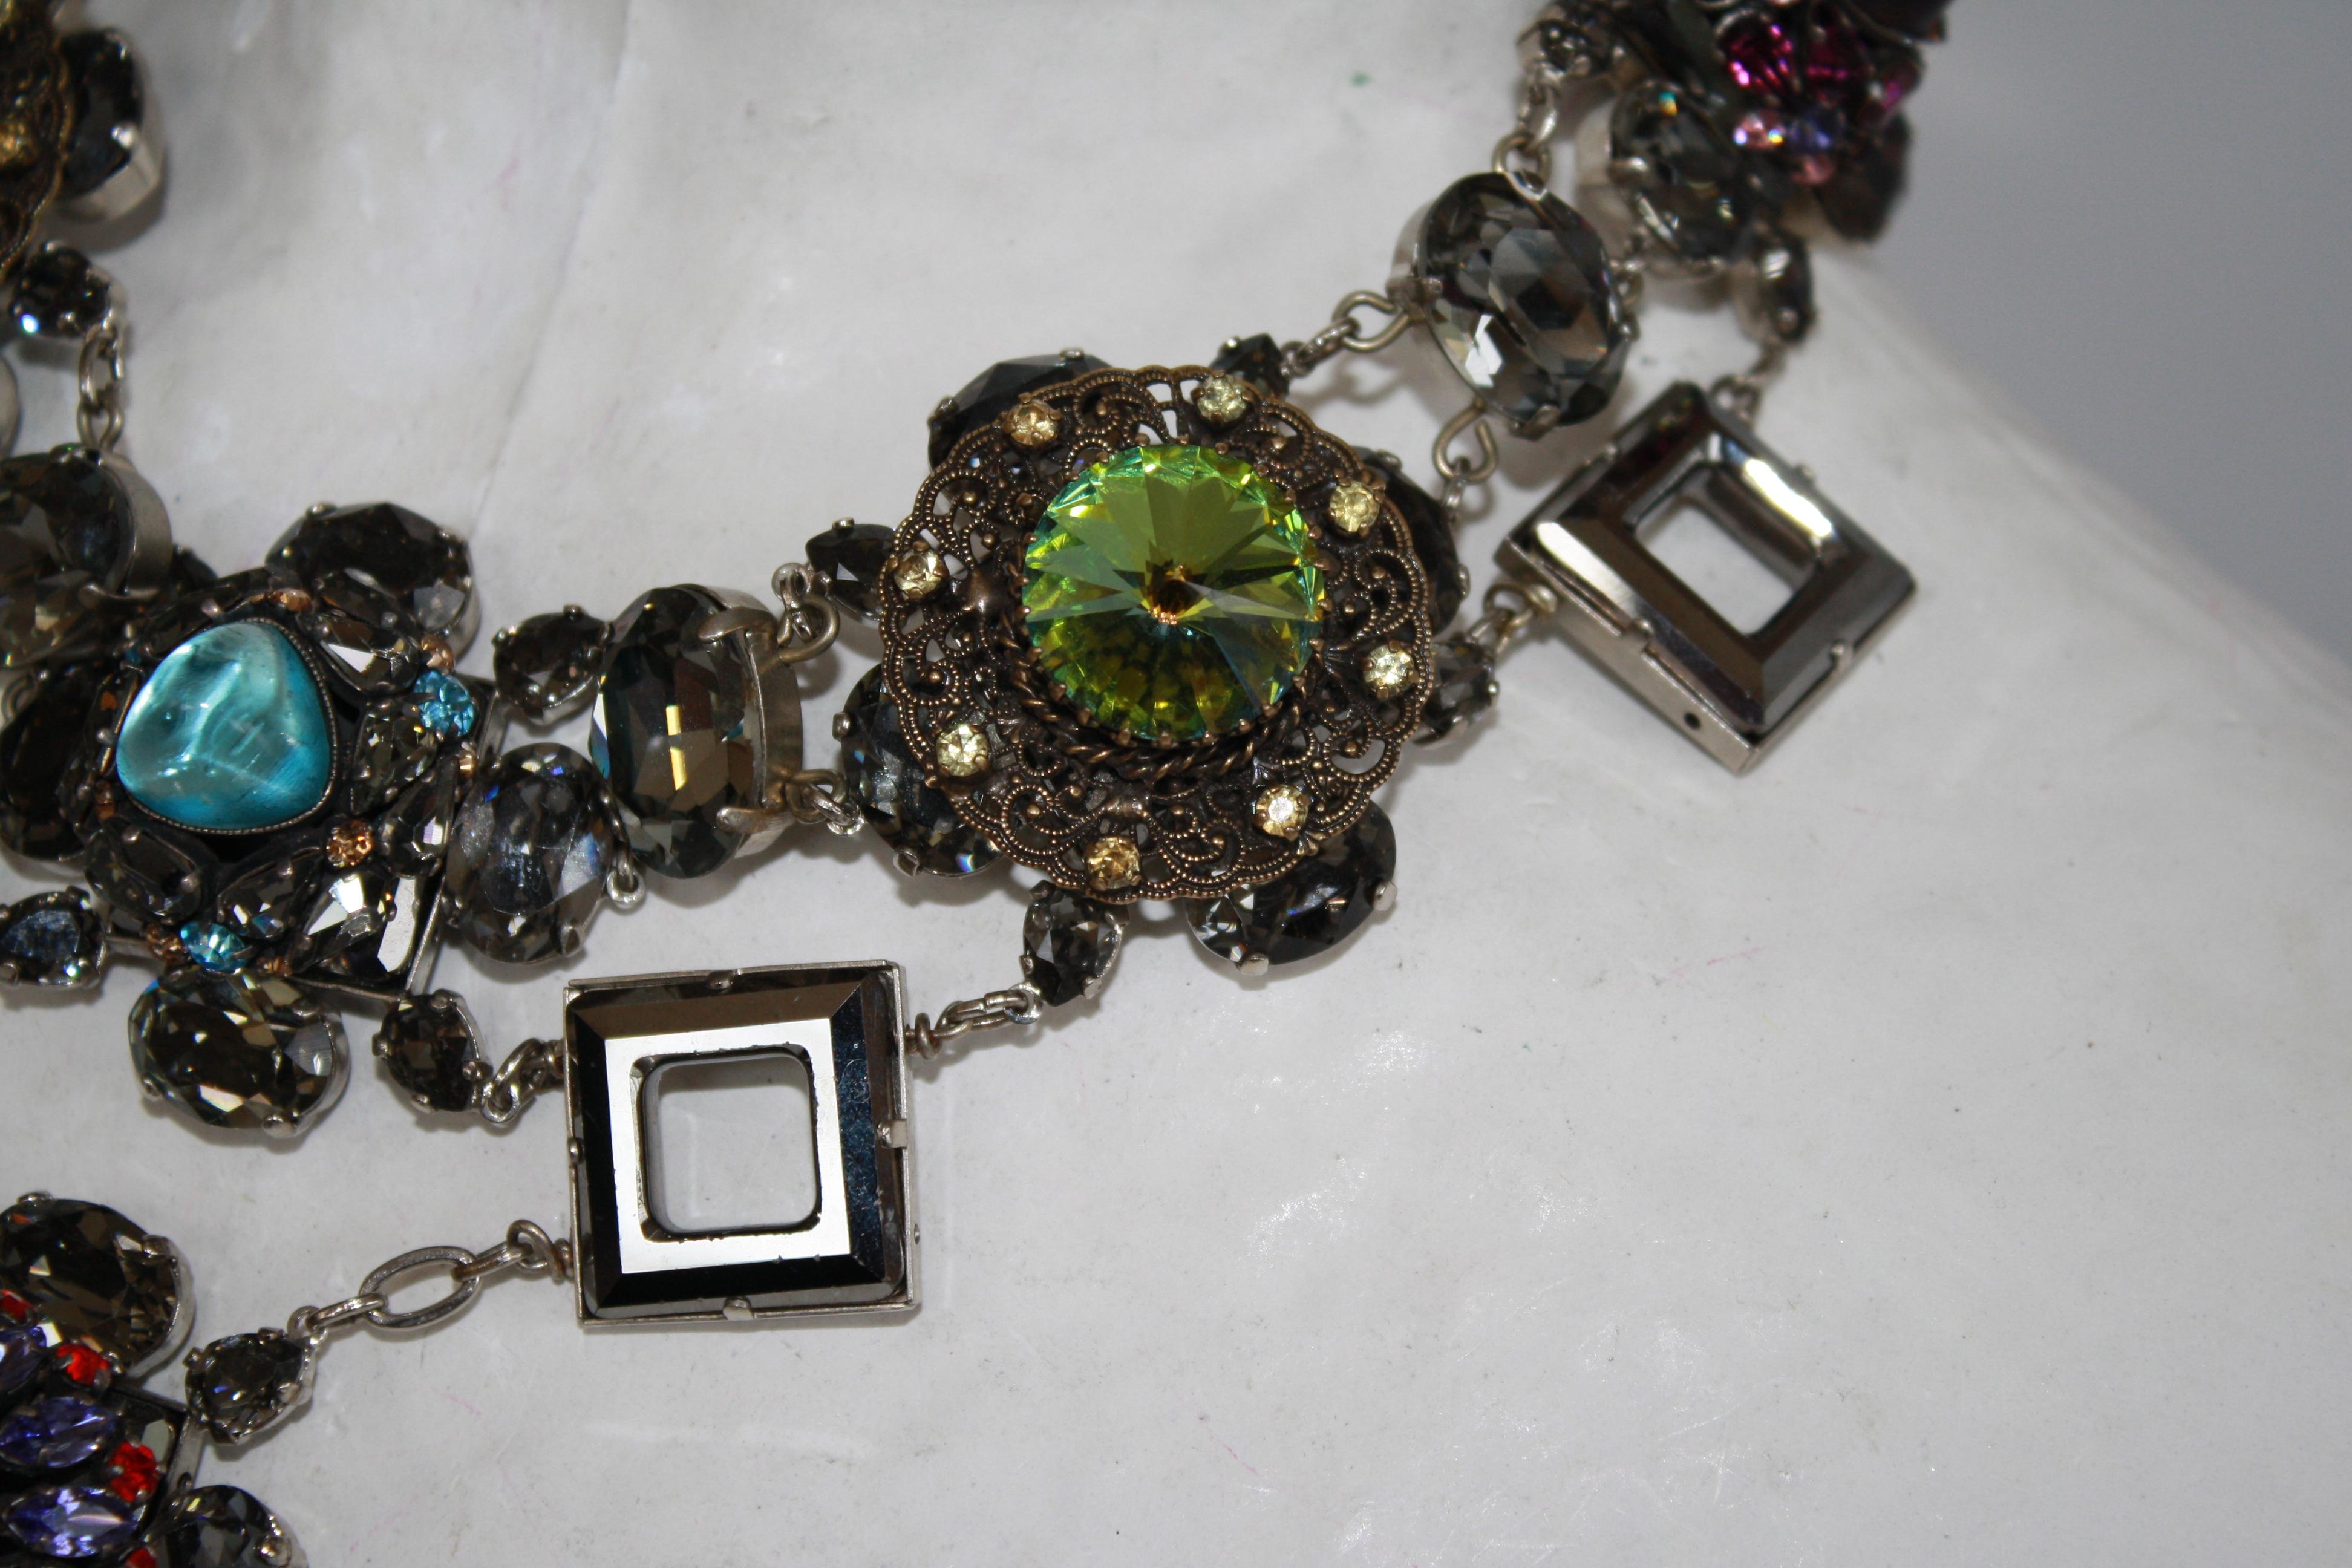 Vintage glass and Swarovski crystal limited series necklace by Francoise Montague.